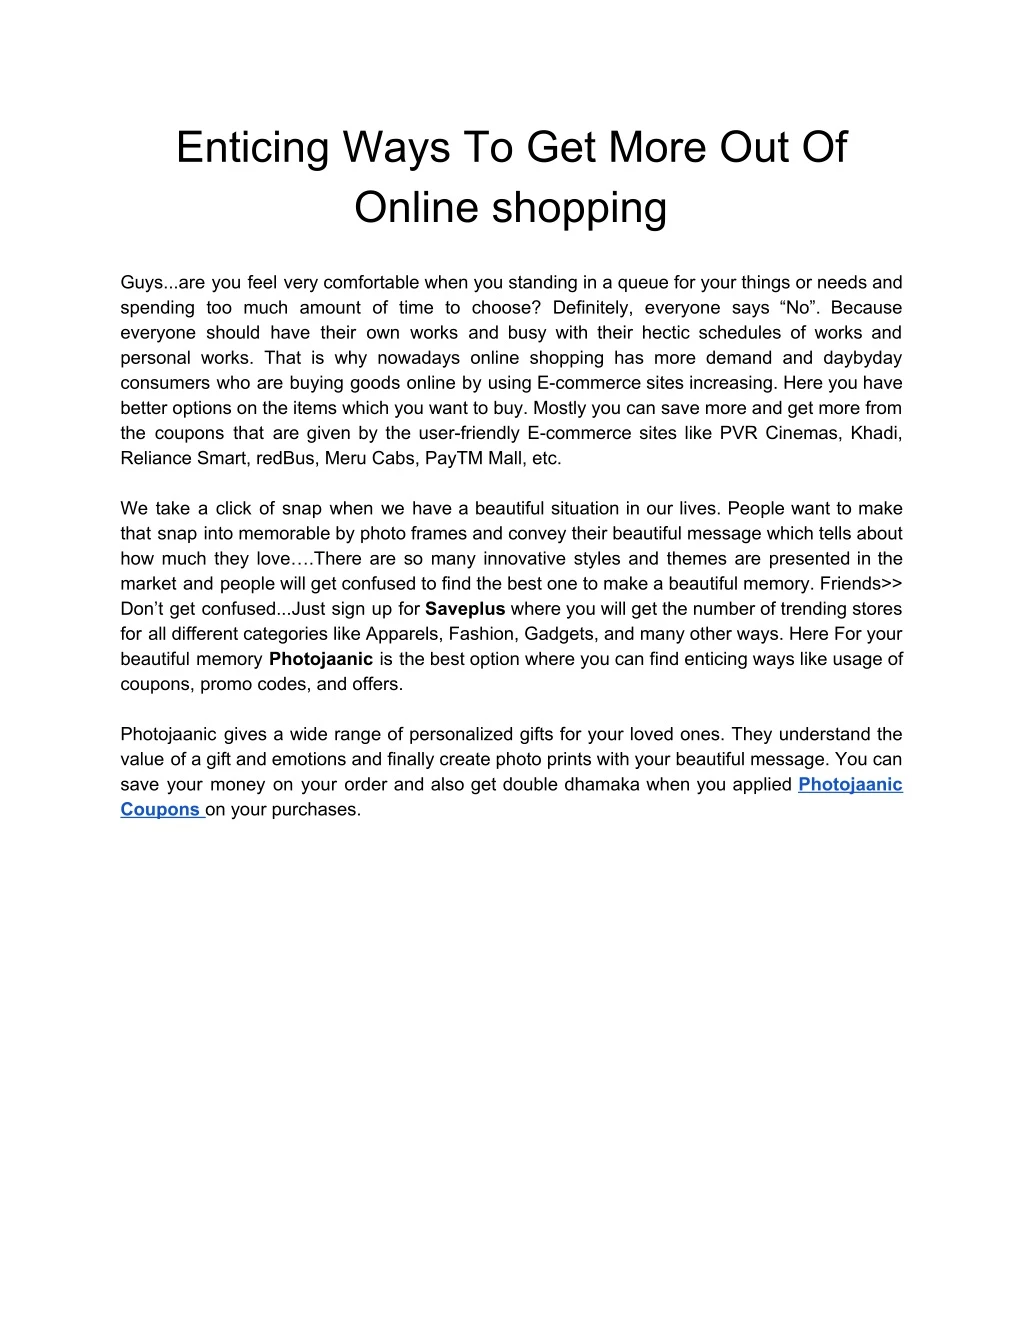 enticing ways to get more out of online shopping